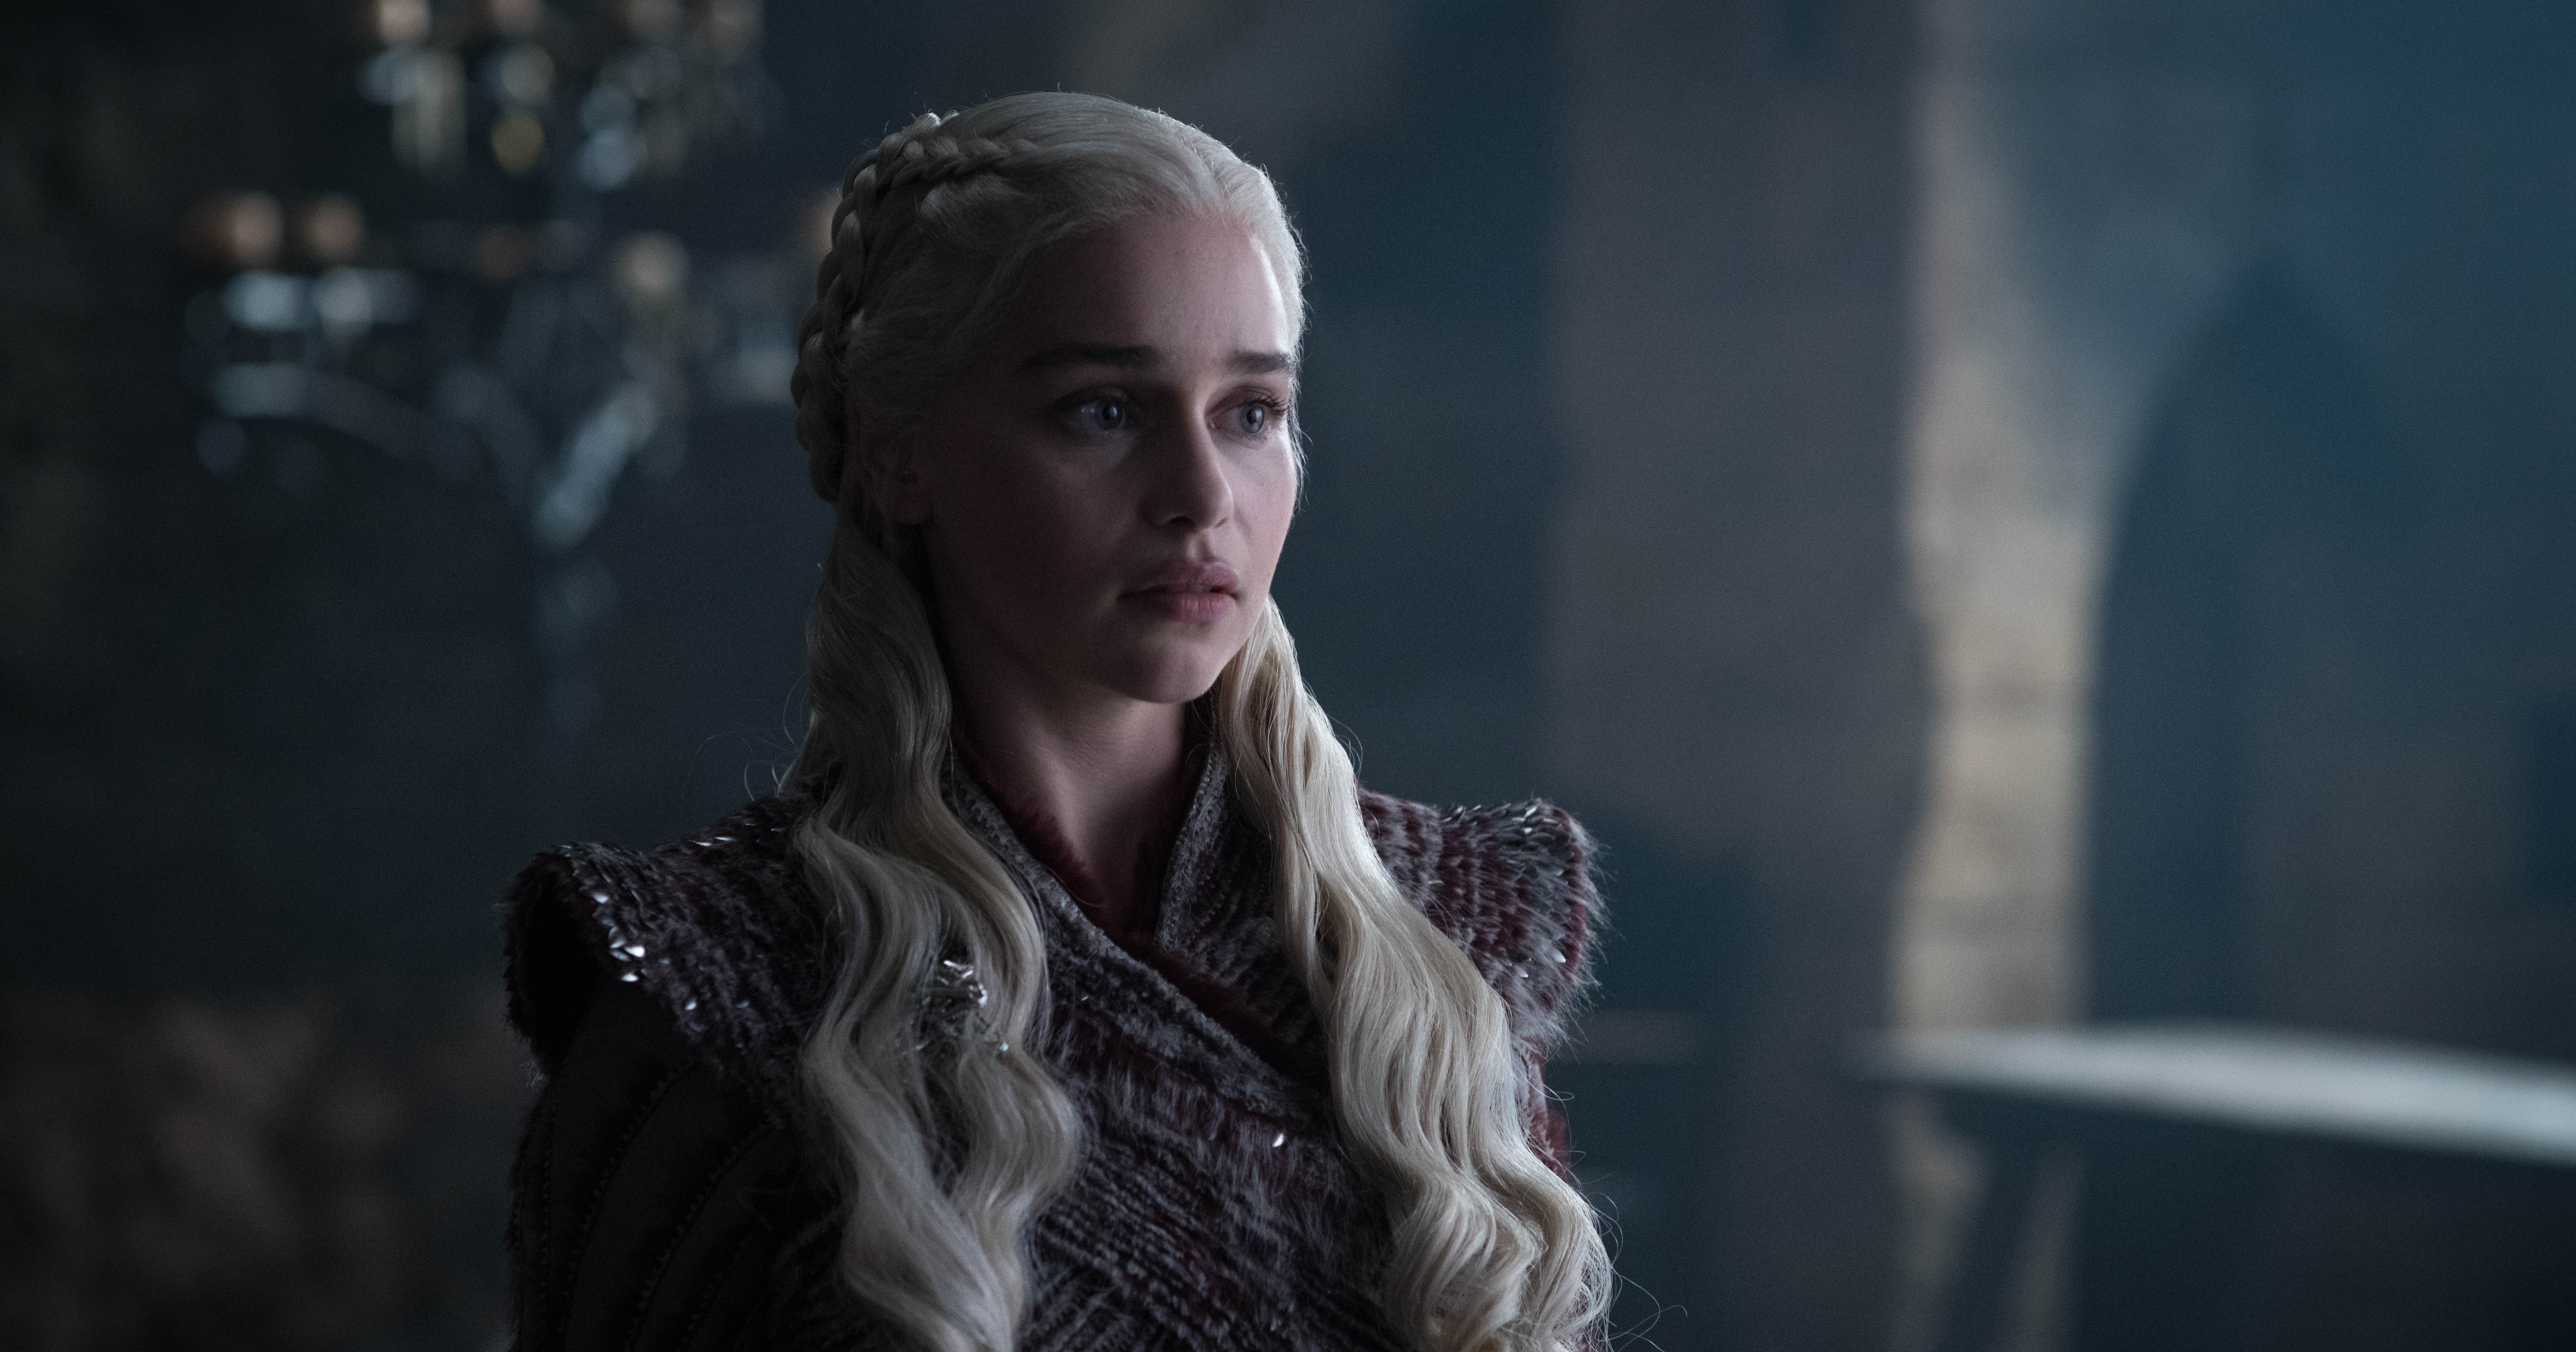 Game of Thrones: TV and Book News, Theories, and More